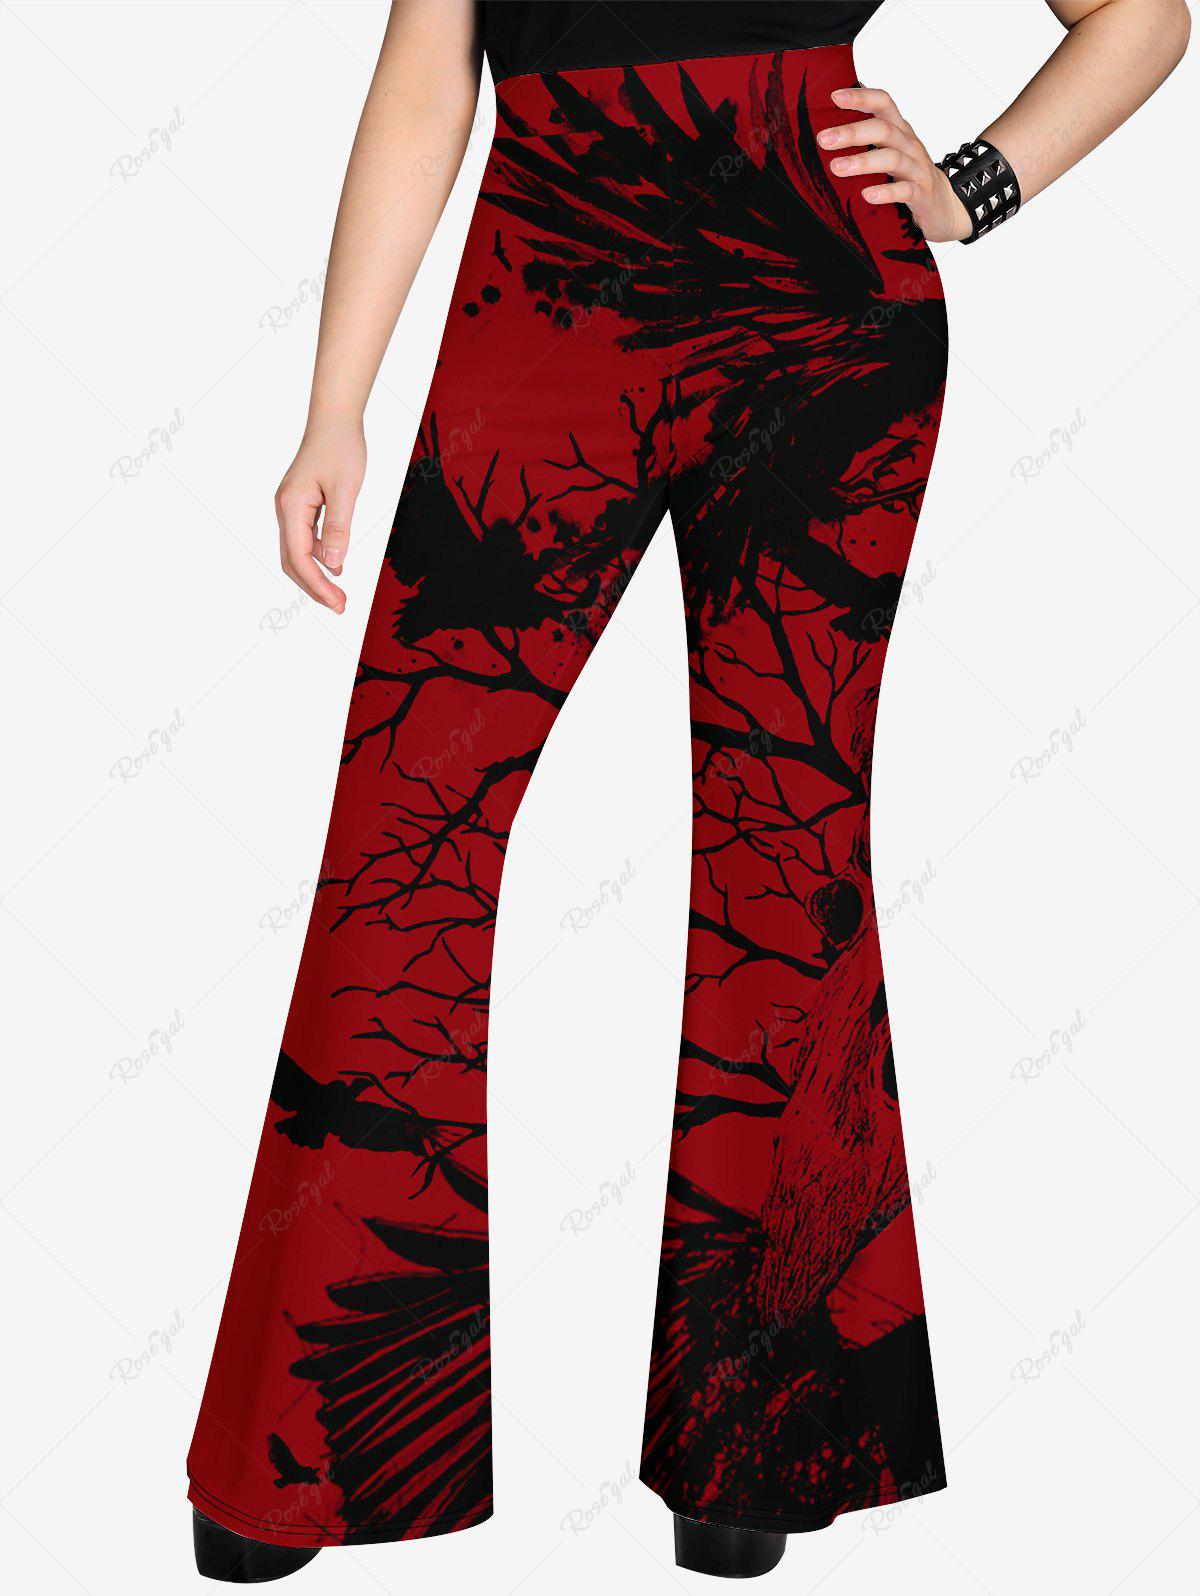 💗Stephanie Loves💗 Gothic Eagle Branch Print Flare Pants